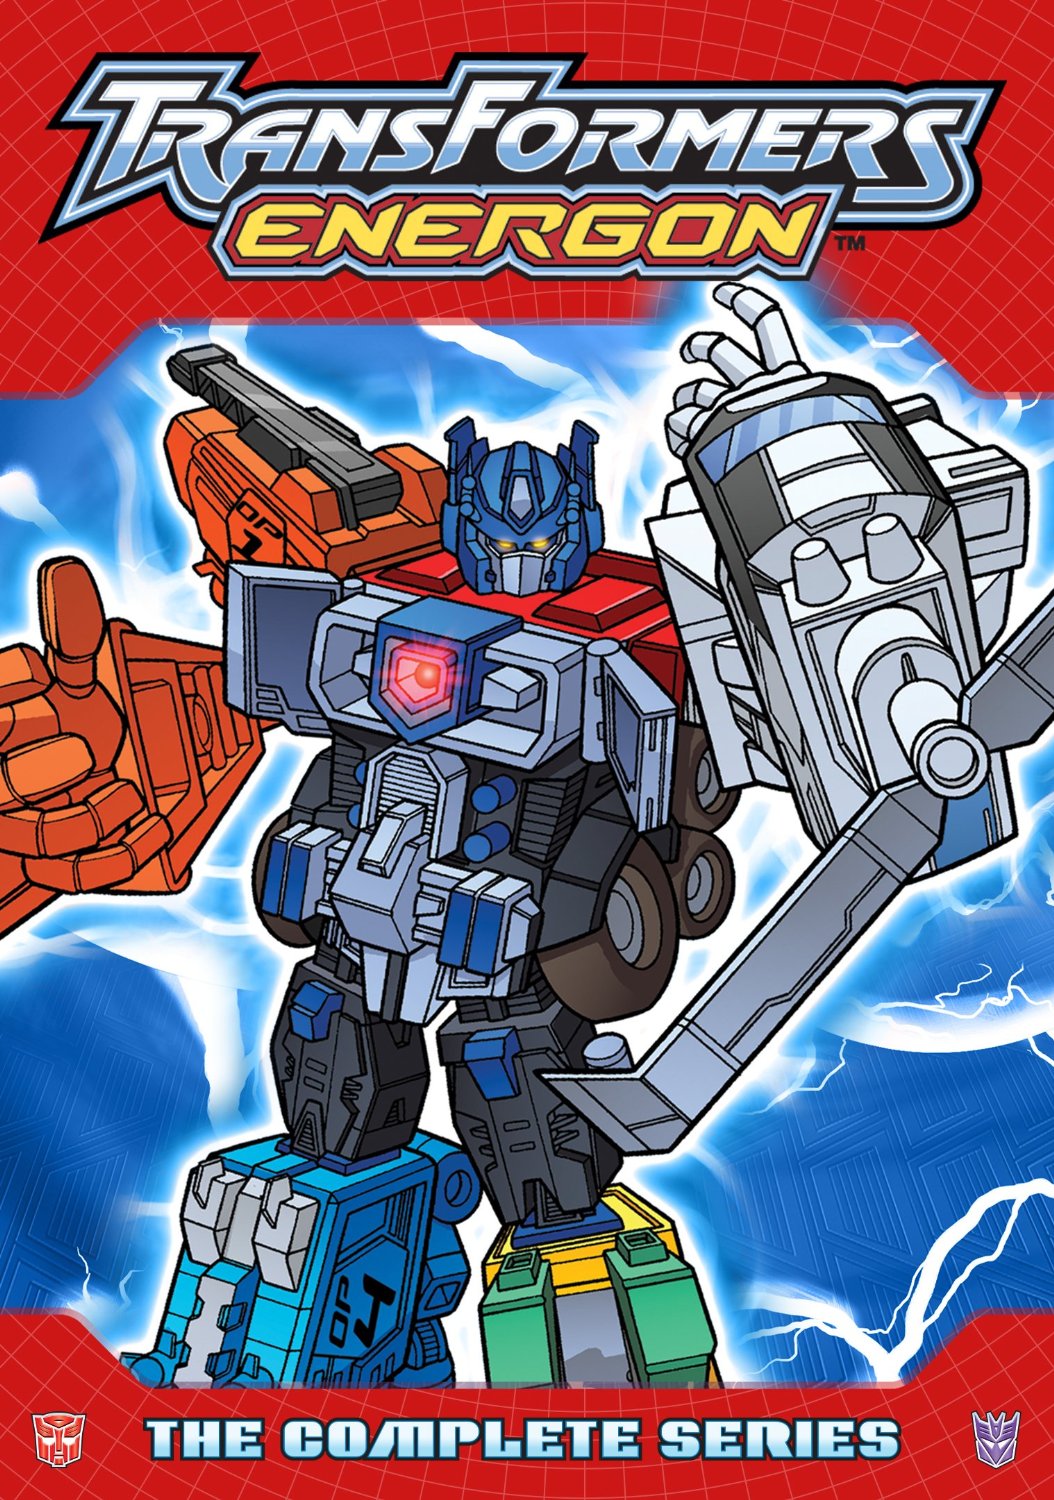 Transformers News: TRANSFORMERS ENERGON: The Complete Series 7-DVD set debuts on home entertainment shelves May 6, 2014